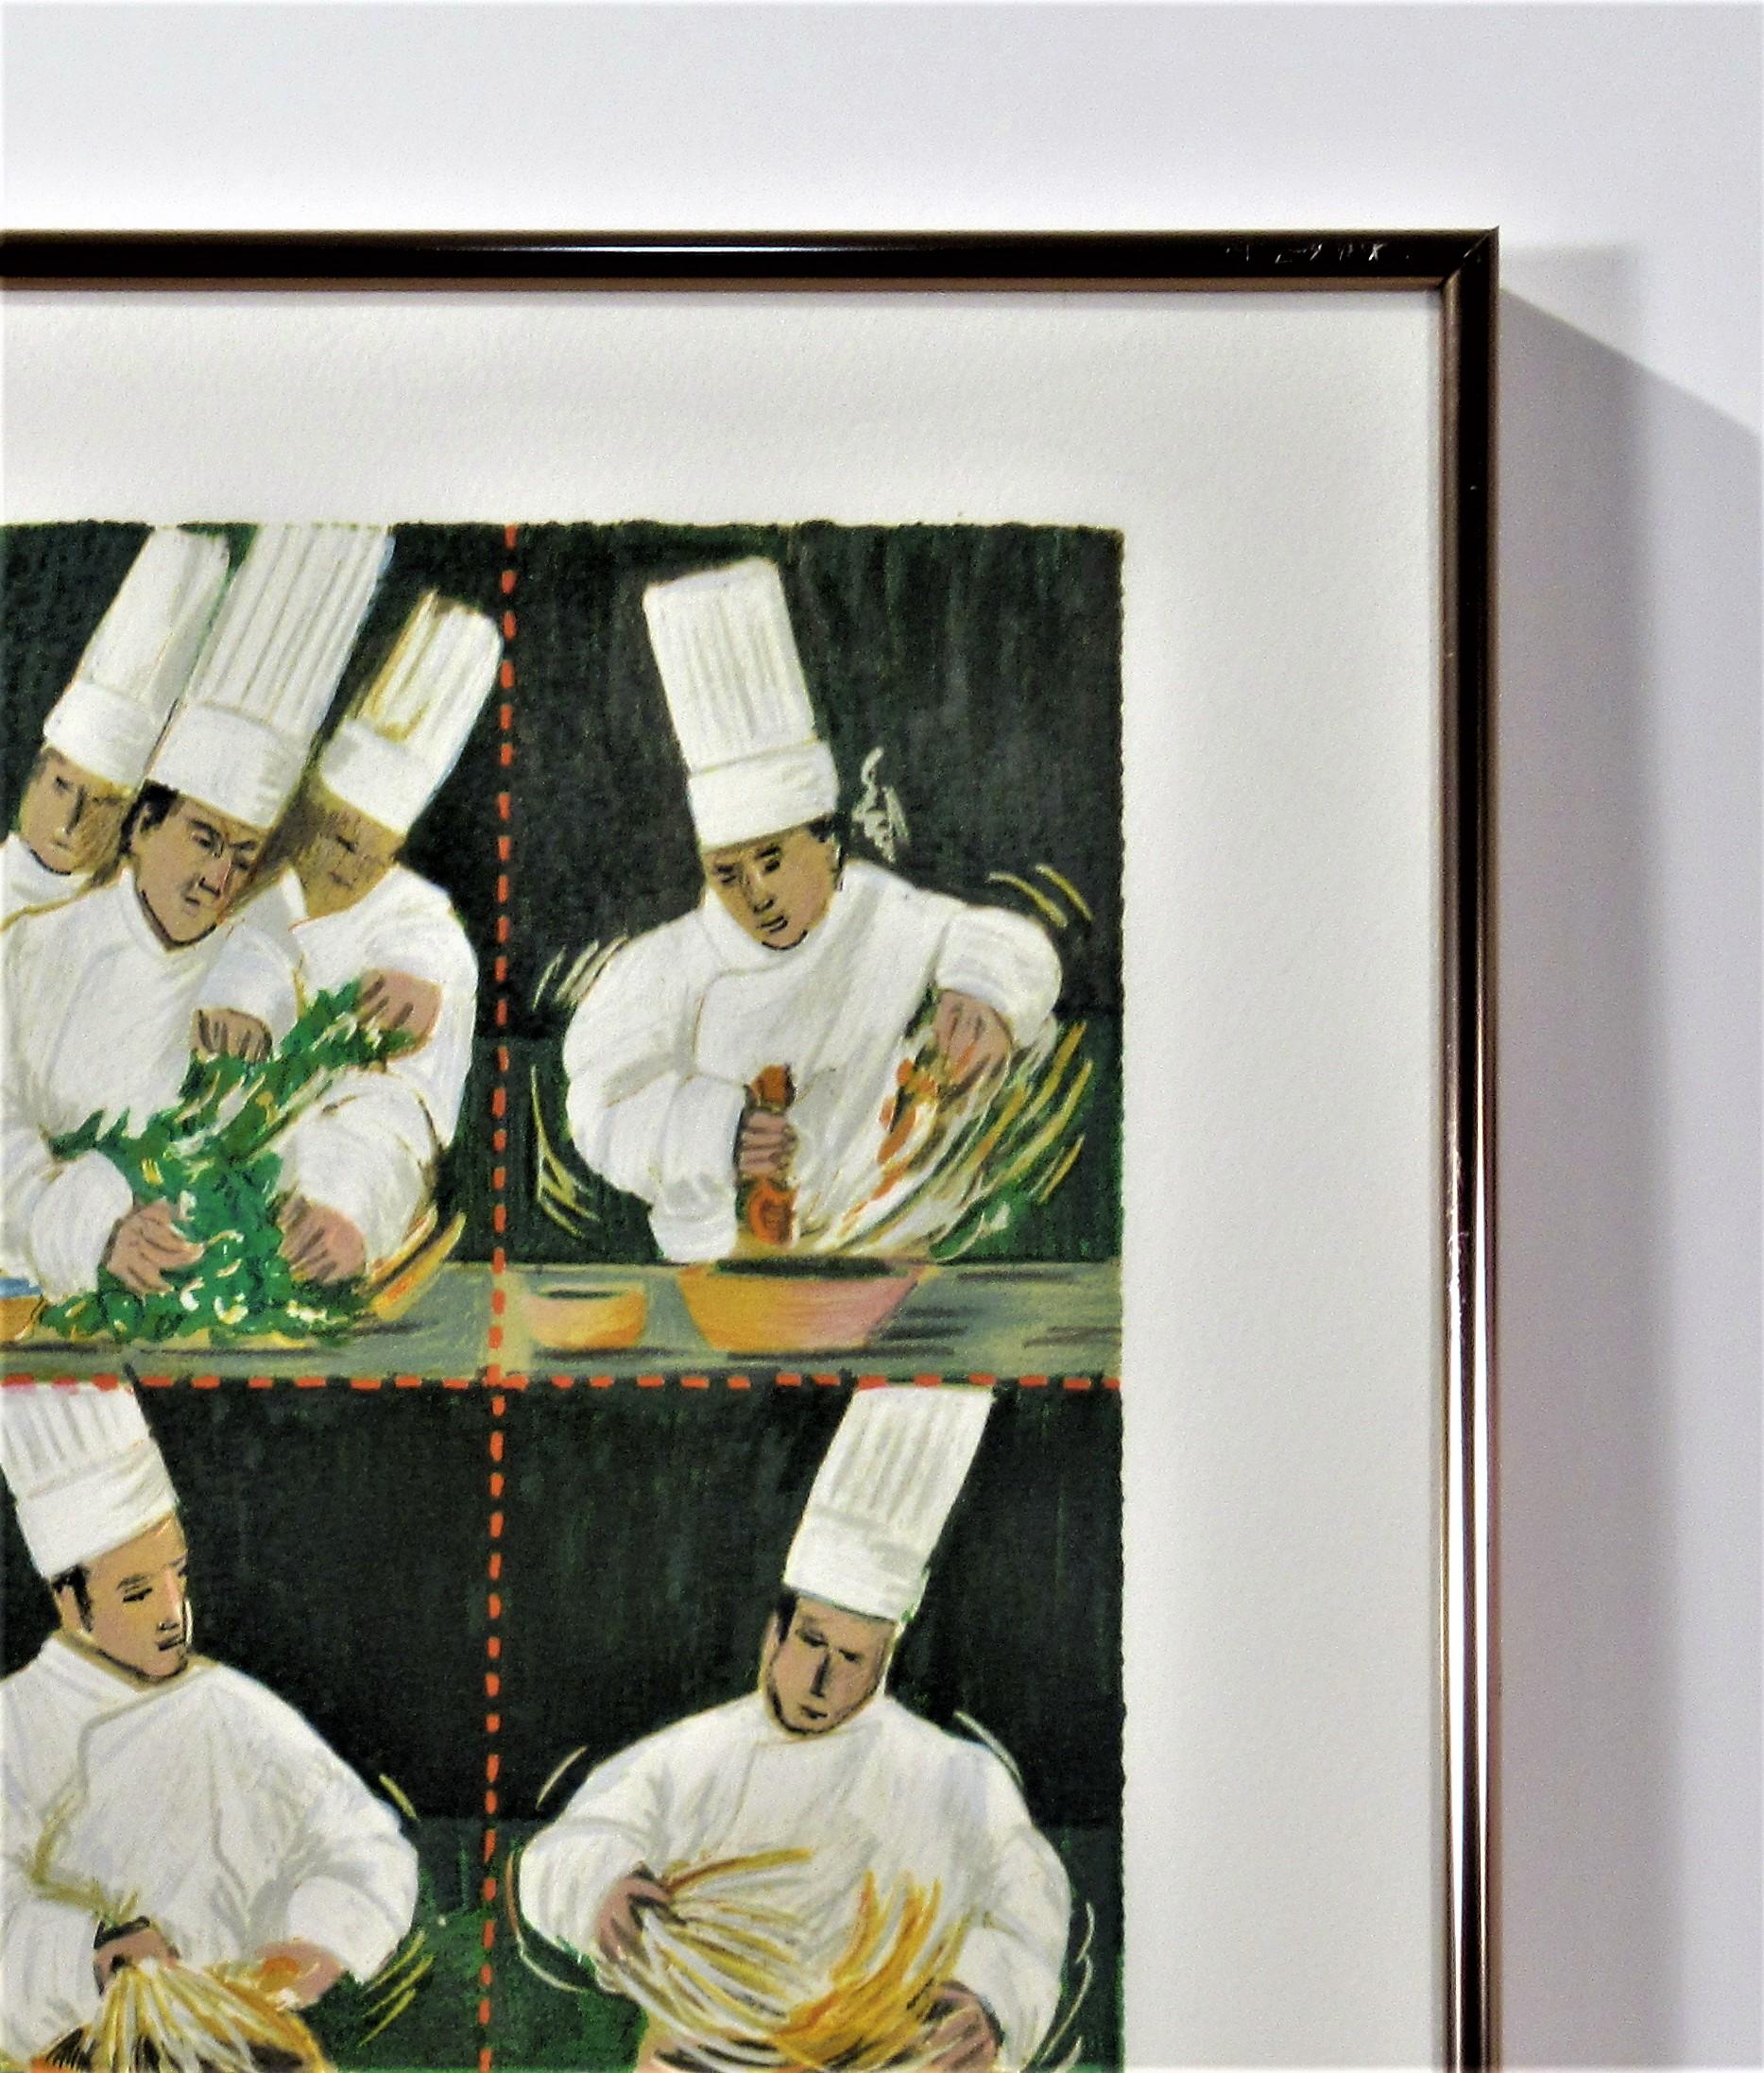 Caesar Salad with Parmesan Croutons, Chef Michel Richard of Citrus and two more. - Beige Figurative Print by Guy Buffet